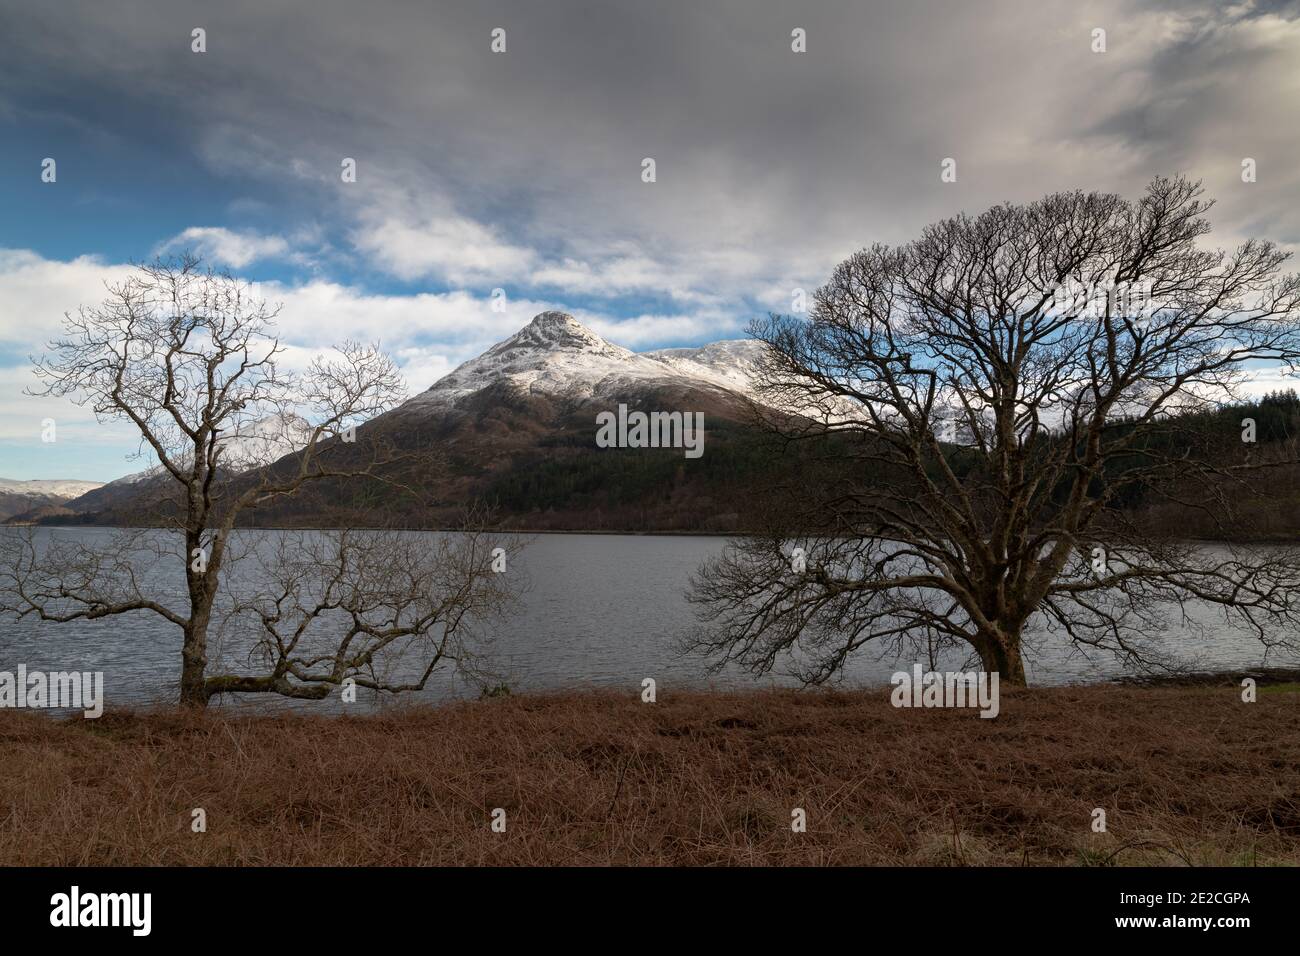 The Pap of Glencoe (Sgorr na Ciche) with a covering of snow, viewed from the north side of Loch Leven, Lochaber, Scotland. Stock Photo